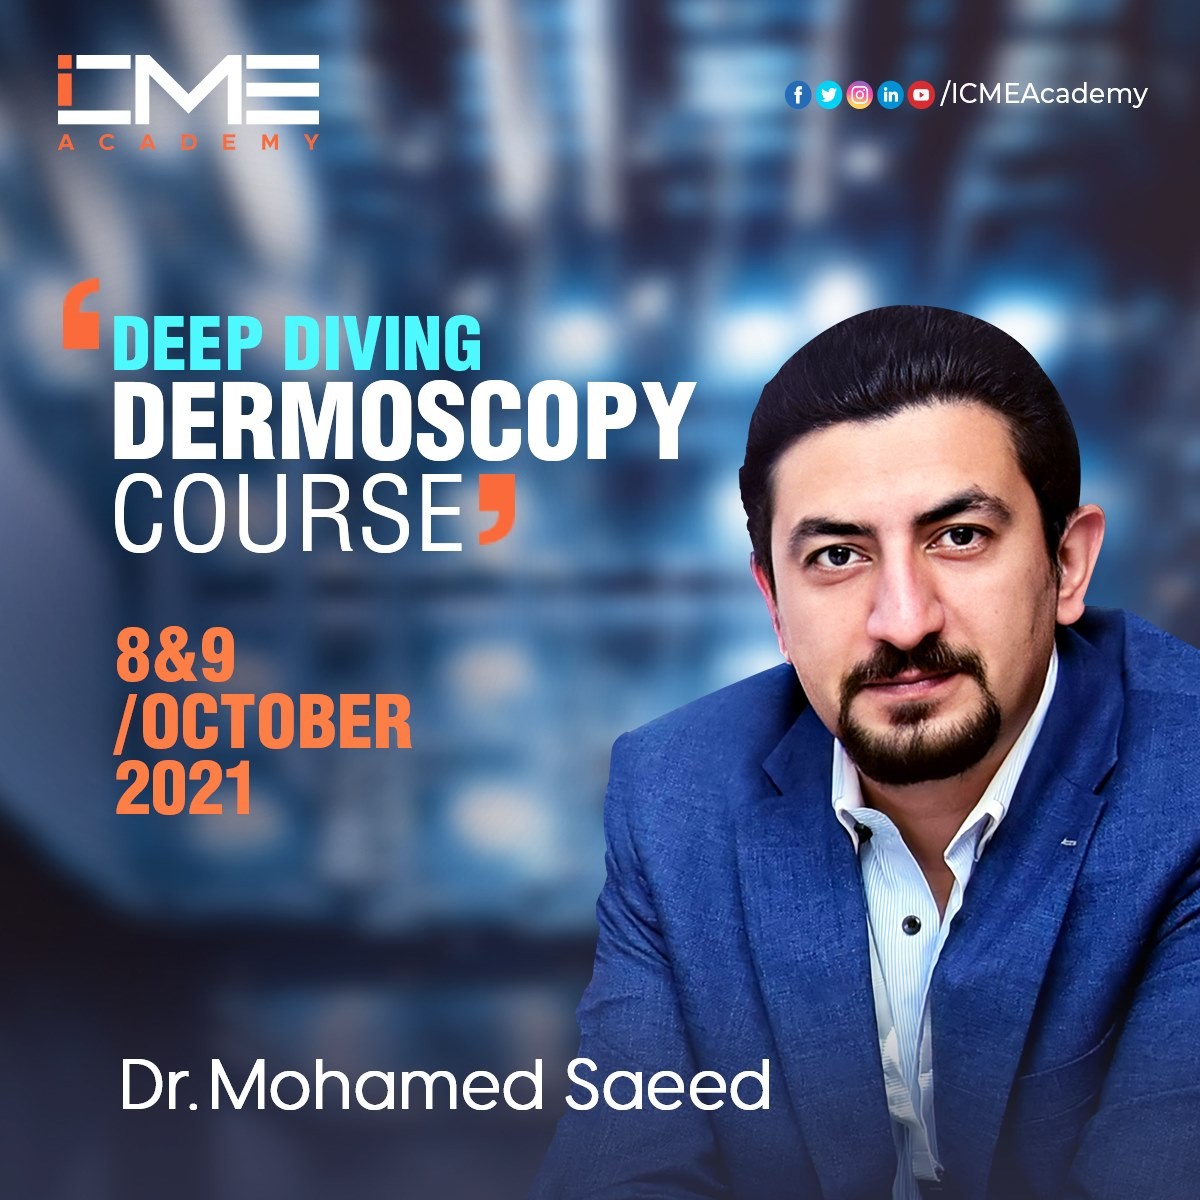 Dr. Mohamed Saeed in Deep Diving Dermoscopy Course